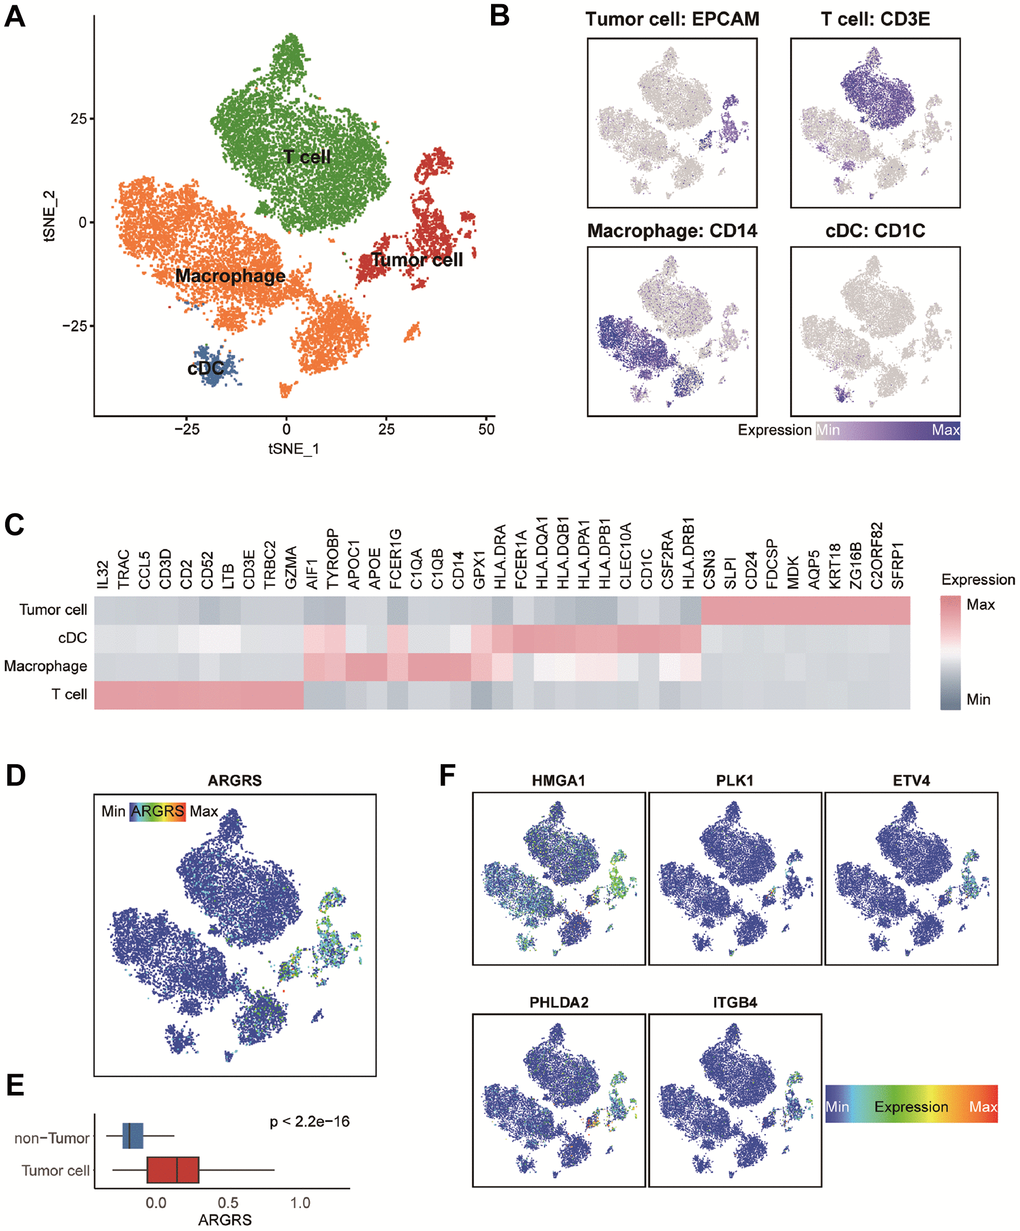 Transcriptomic clustering of NSCLC patients from GSE148071 dataset. (A) Marker-based cell type identification analysis allowed the prediction of four broad cell types across all profiled single cells. (B) Expression levels of cell type signatures overlaid on the t-SNE representation. EPCAM for tumor cells, CD3E for T cells, CD14 for macrophages and CD1C for cDC. (C) Gene expression heatmap of top-10 cell type-specific marker genes as measured by Wilcoxon rank-sum test. (D) ARGRS overlaid on the t-SNE representation. (E) Boxplot showing the levels of ARGRS between tumor and non-tumor cells. Horizontal lines in the boxplots represent the median, the lower and upper hinges correspond to the first and third quartiles, and the whiskers extend from the hinge up to 1.5 times the interquartile range from the hinge. (F) Expression levels of the five genes in the prognostic model overlaid on the t-SNE representation.